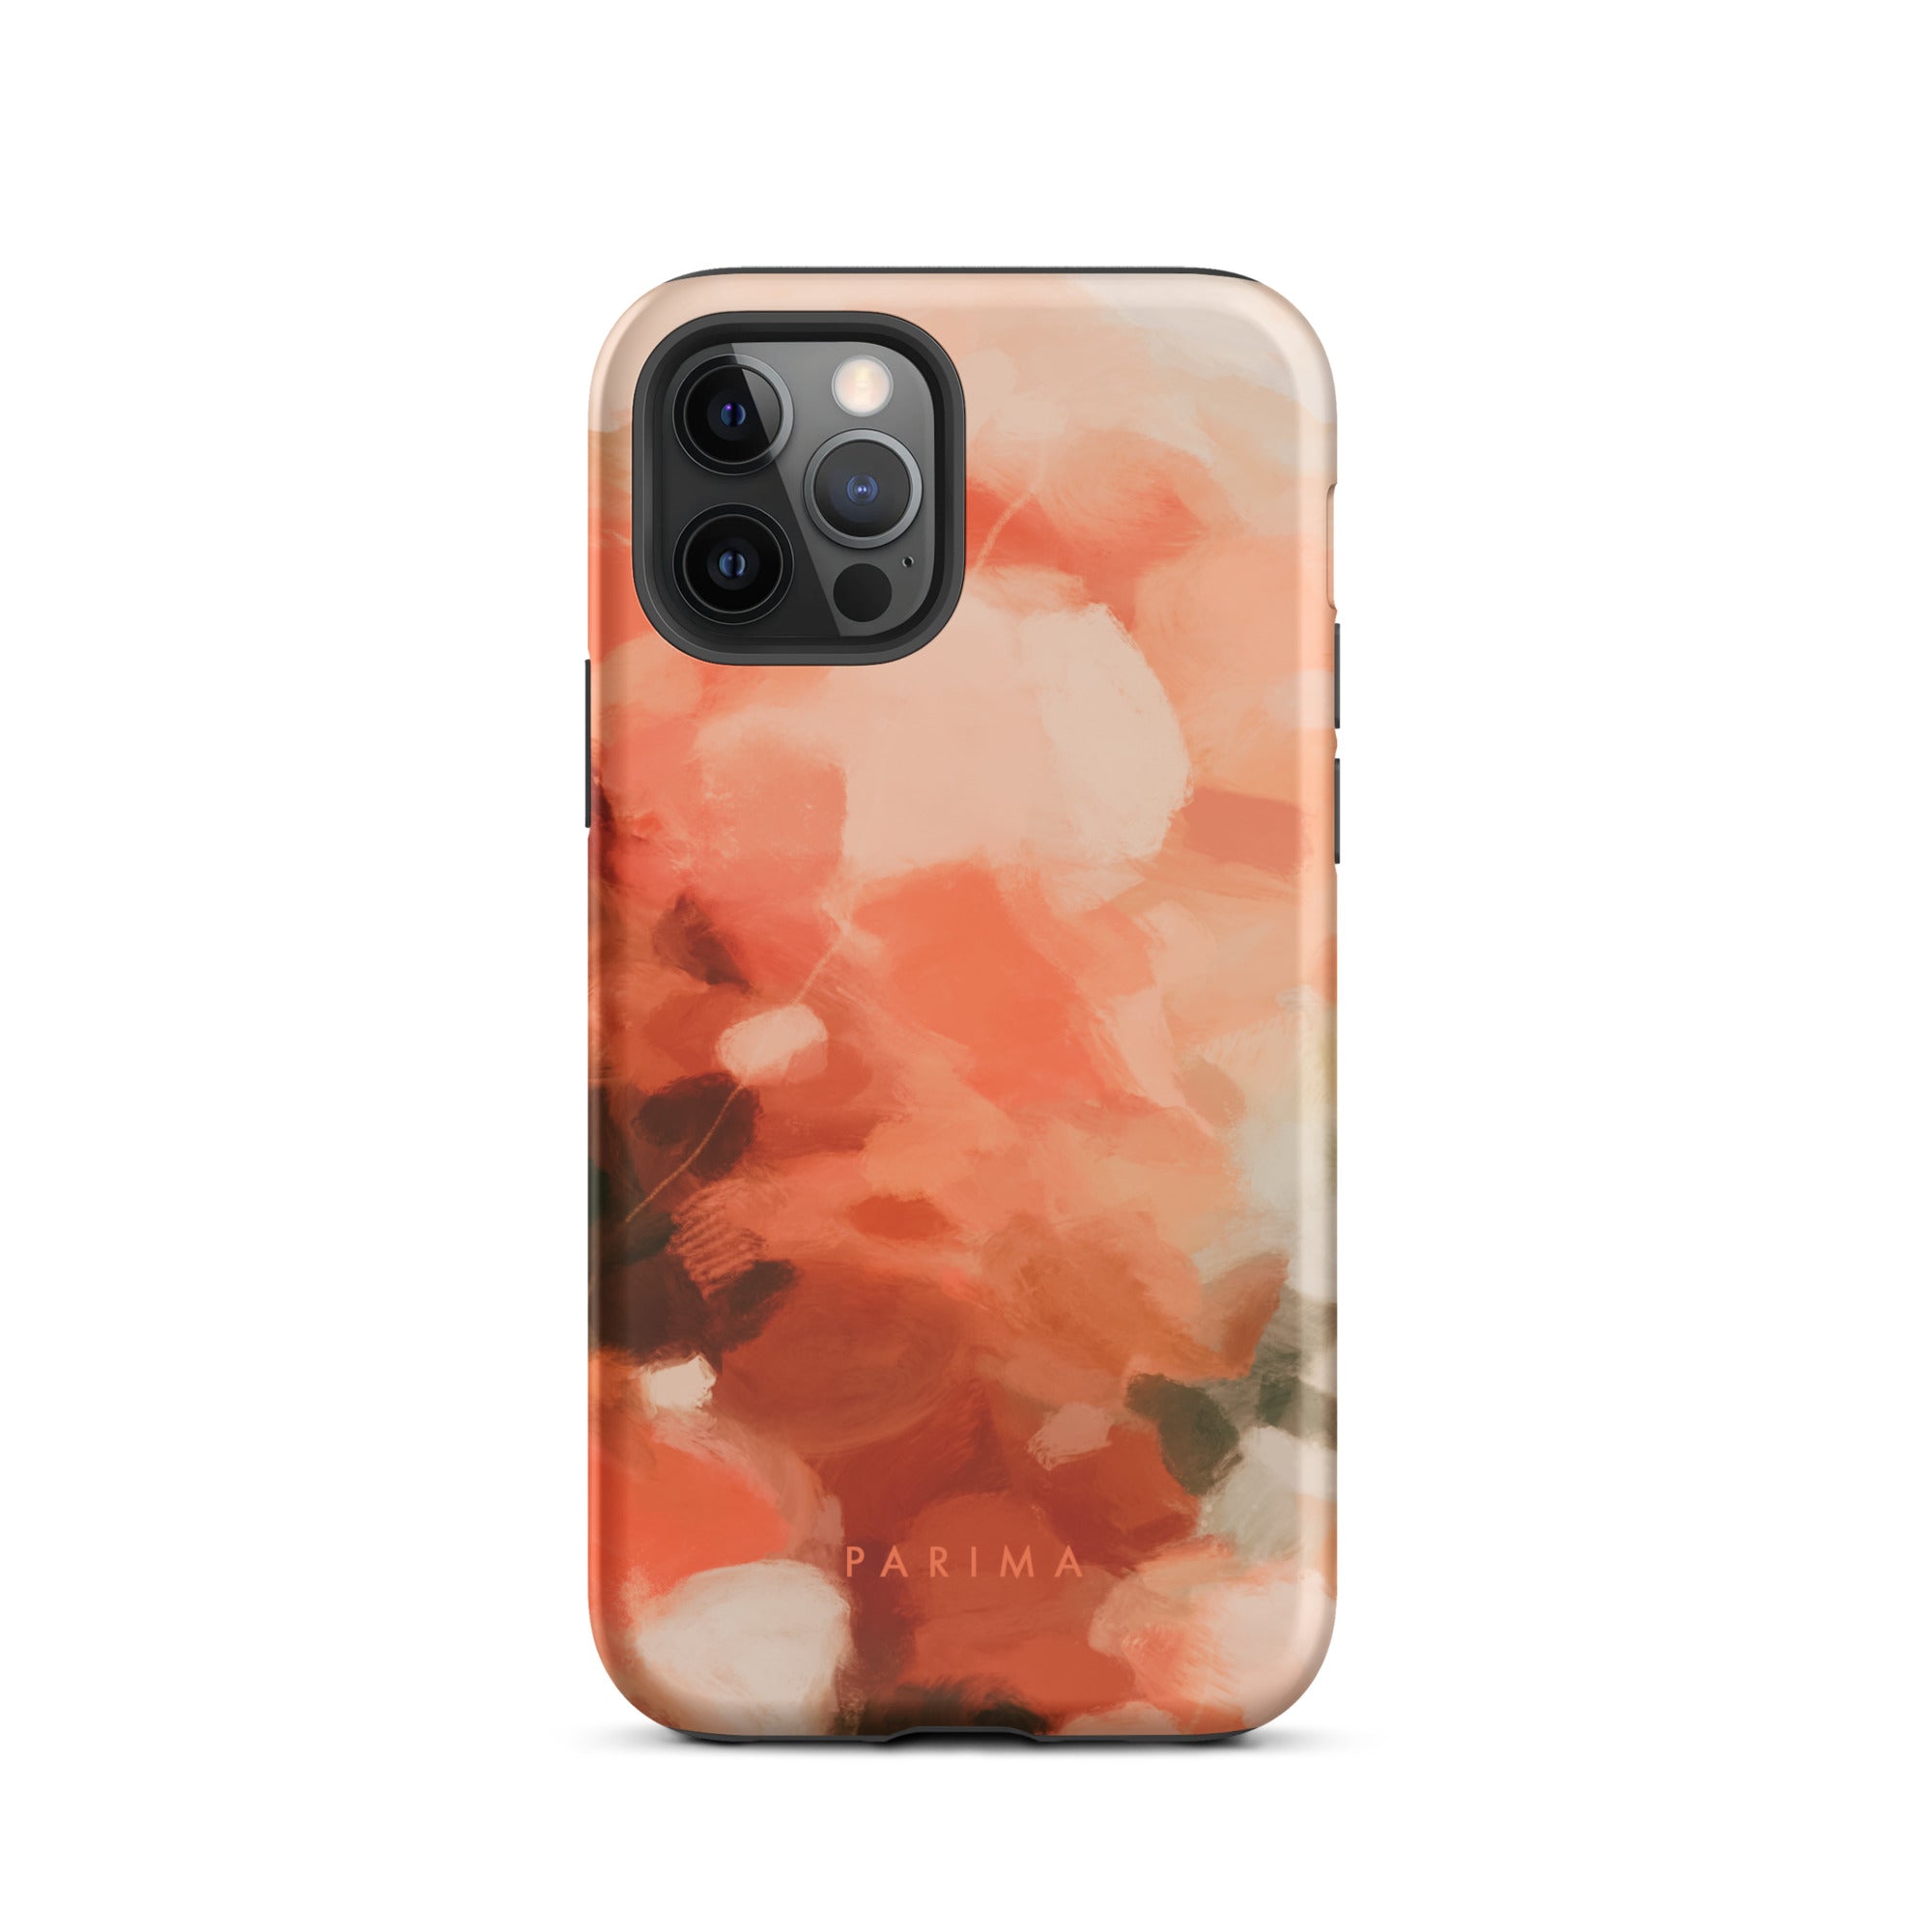 Sweet Nectar, orange and pink abstract art - iPhone 12 Pro tough case by Parima Studio